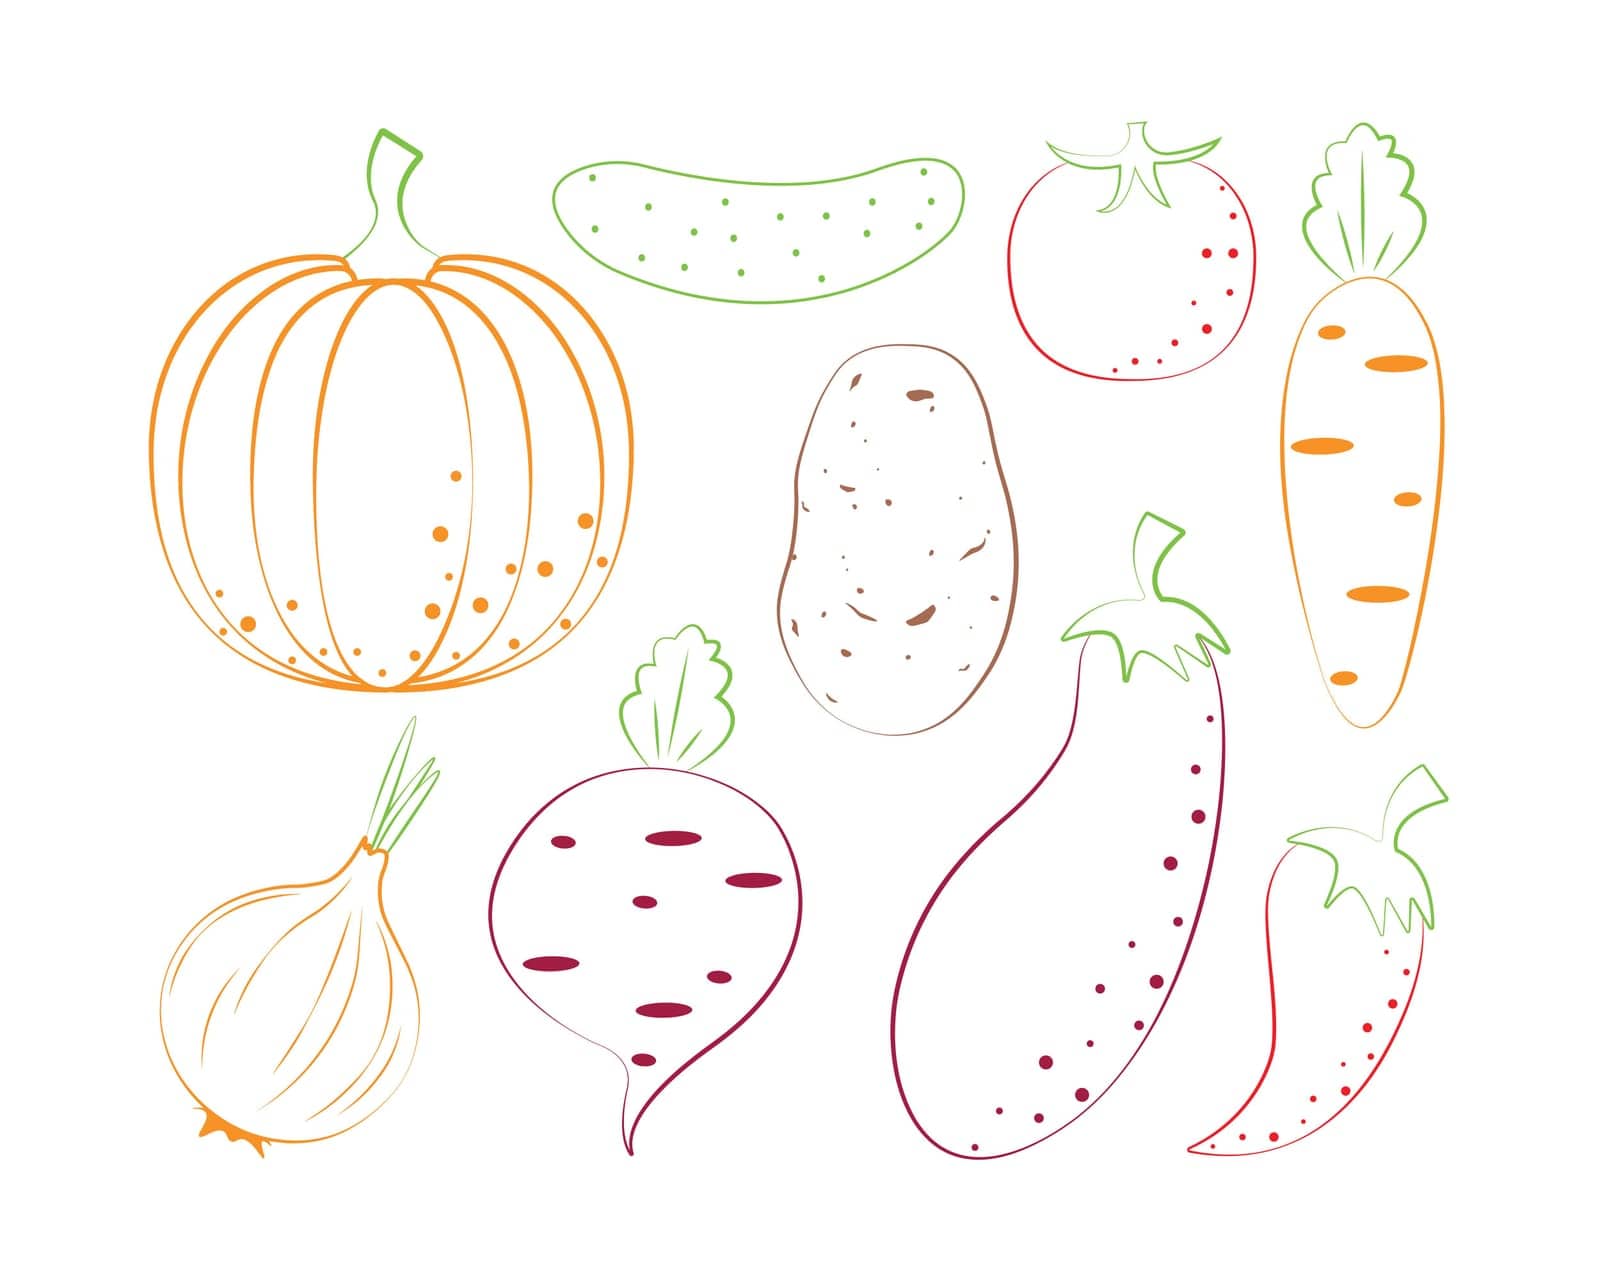 Vegetables coloring book. A children s coloring book featuring fruits such as pumpkin, carrots, peppers and beets, as well as cucumber, onion, tomato and potatoes with eggplant. Garden vegetables